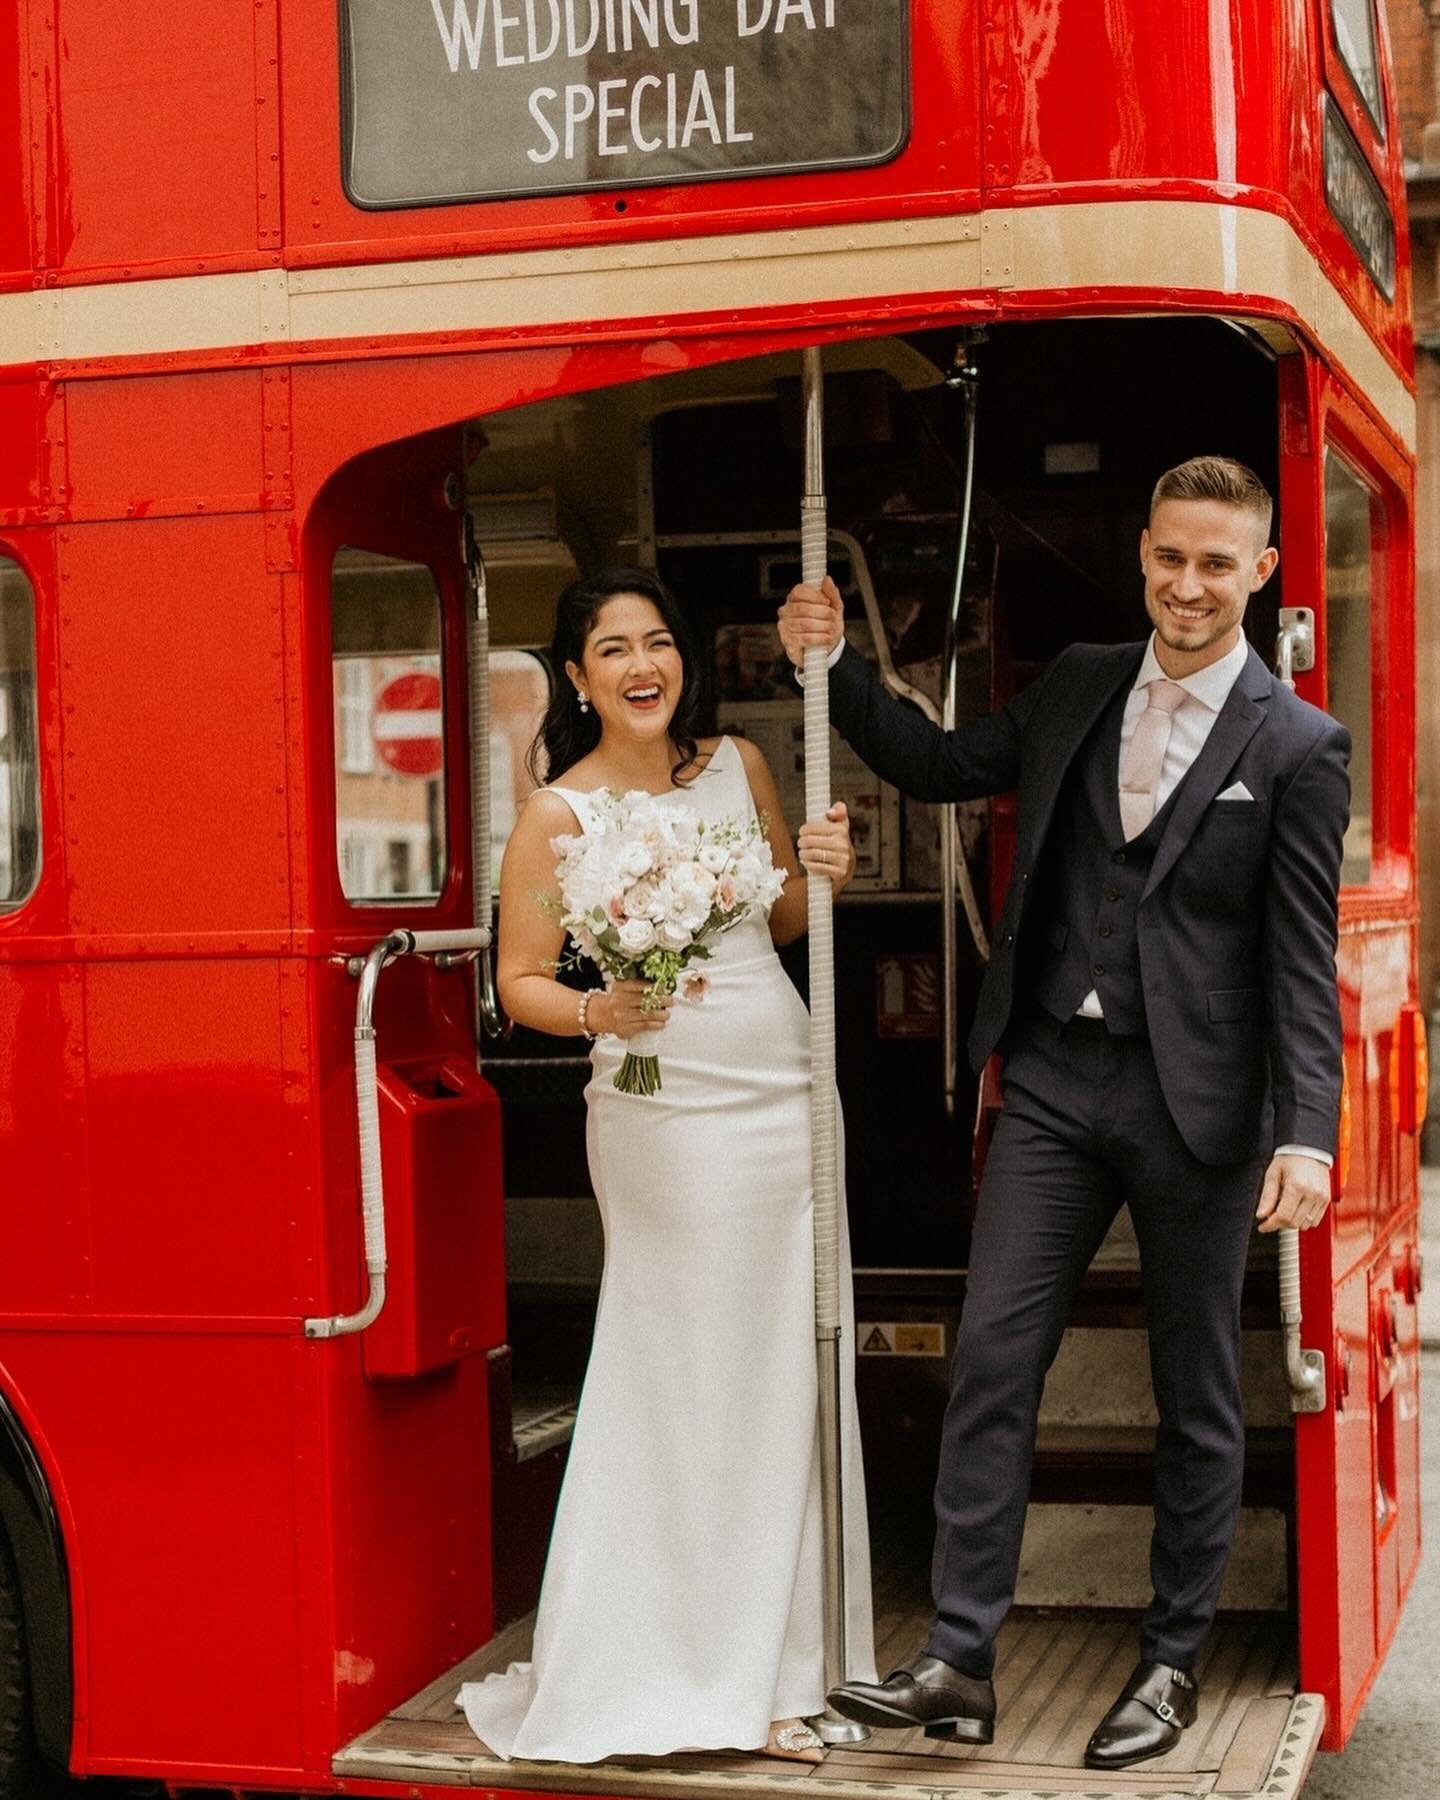 MELISSA // we love seeing a London wedding, and this red bus might just be a giveaway! This was Melissa&rsquo;s first part of her wedding before second celebrations in the Caribbean! ☀️ wearing &lsquo;Dawn&rsquo; by @scoutbridal a beautiful fit for r